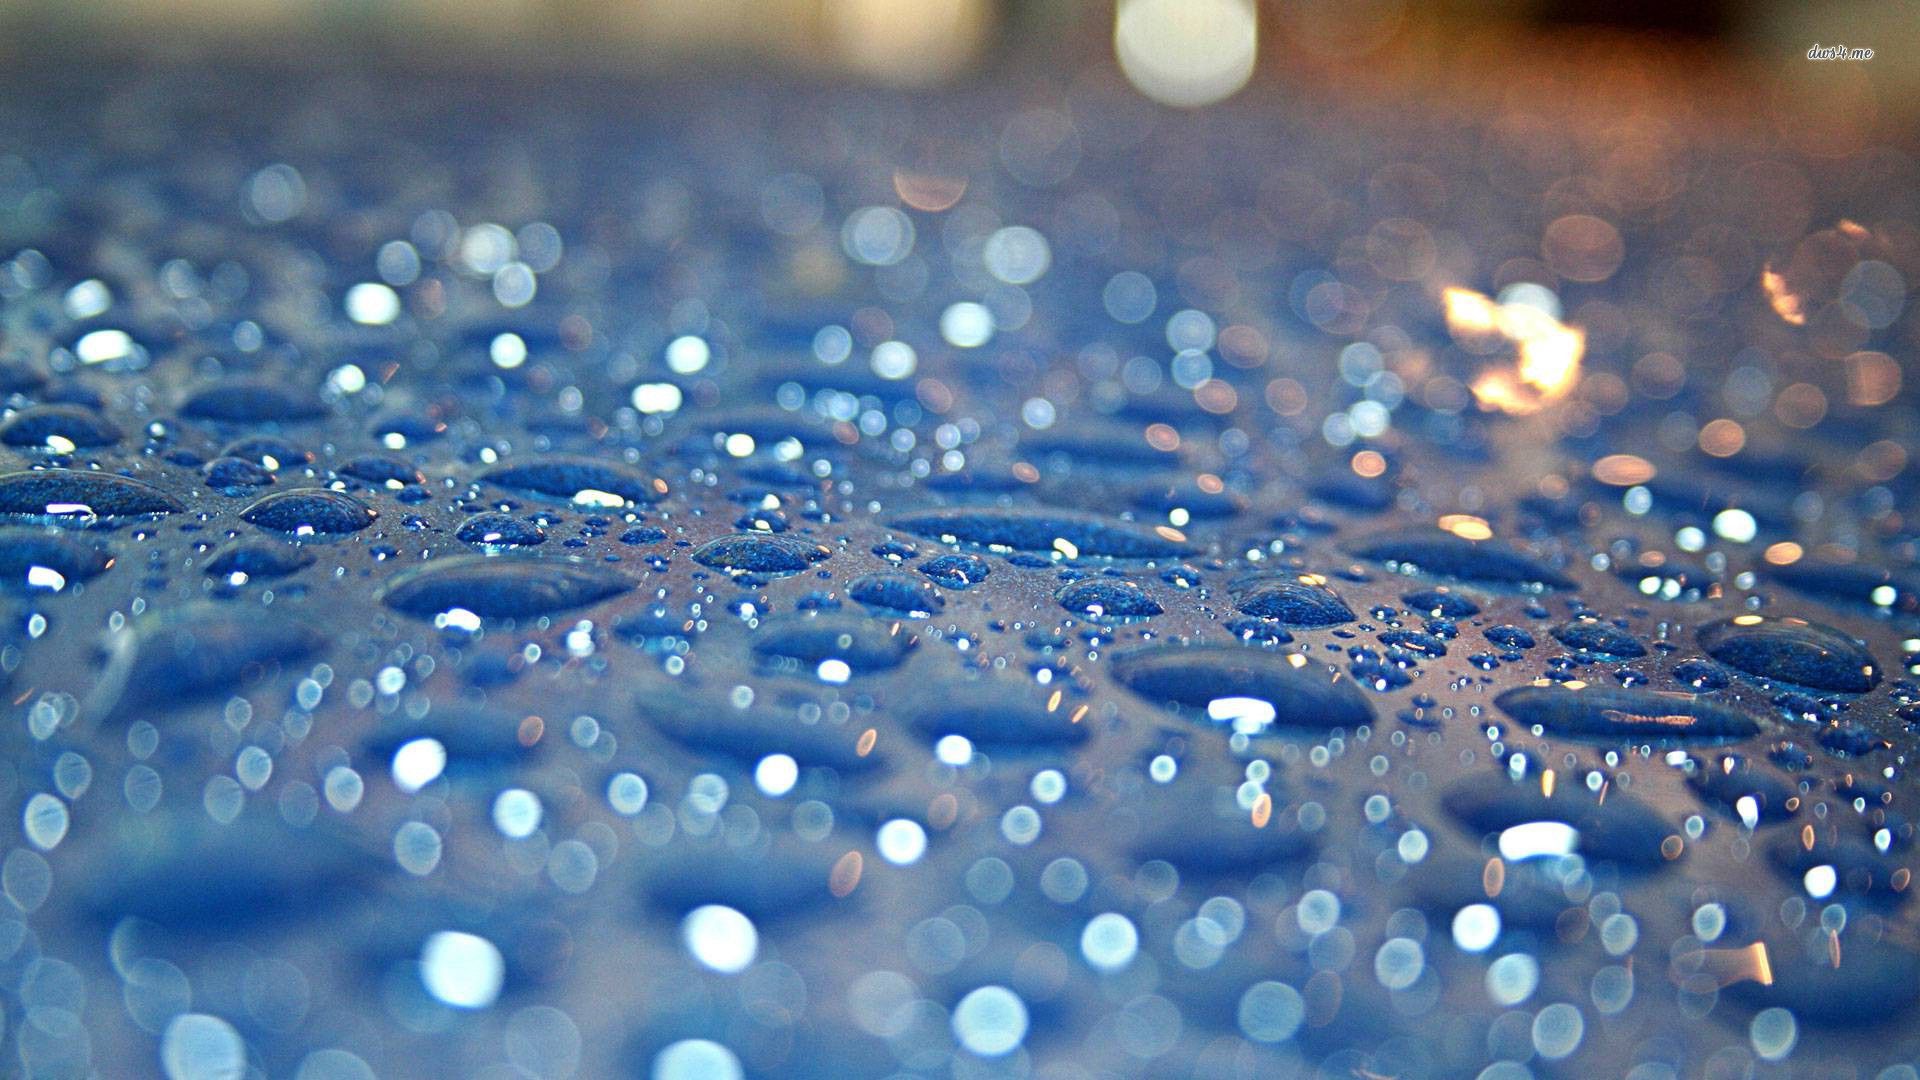 Free Picture Of Raindrops, Download .clipart Library.com